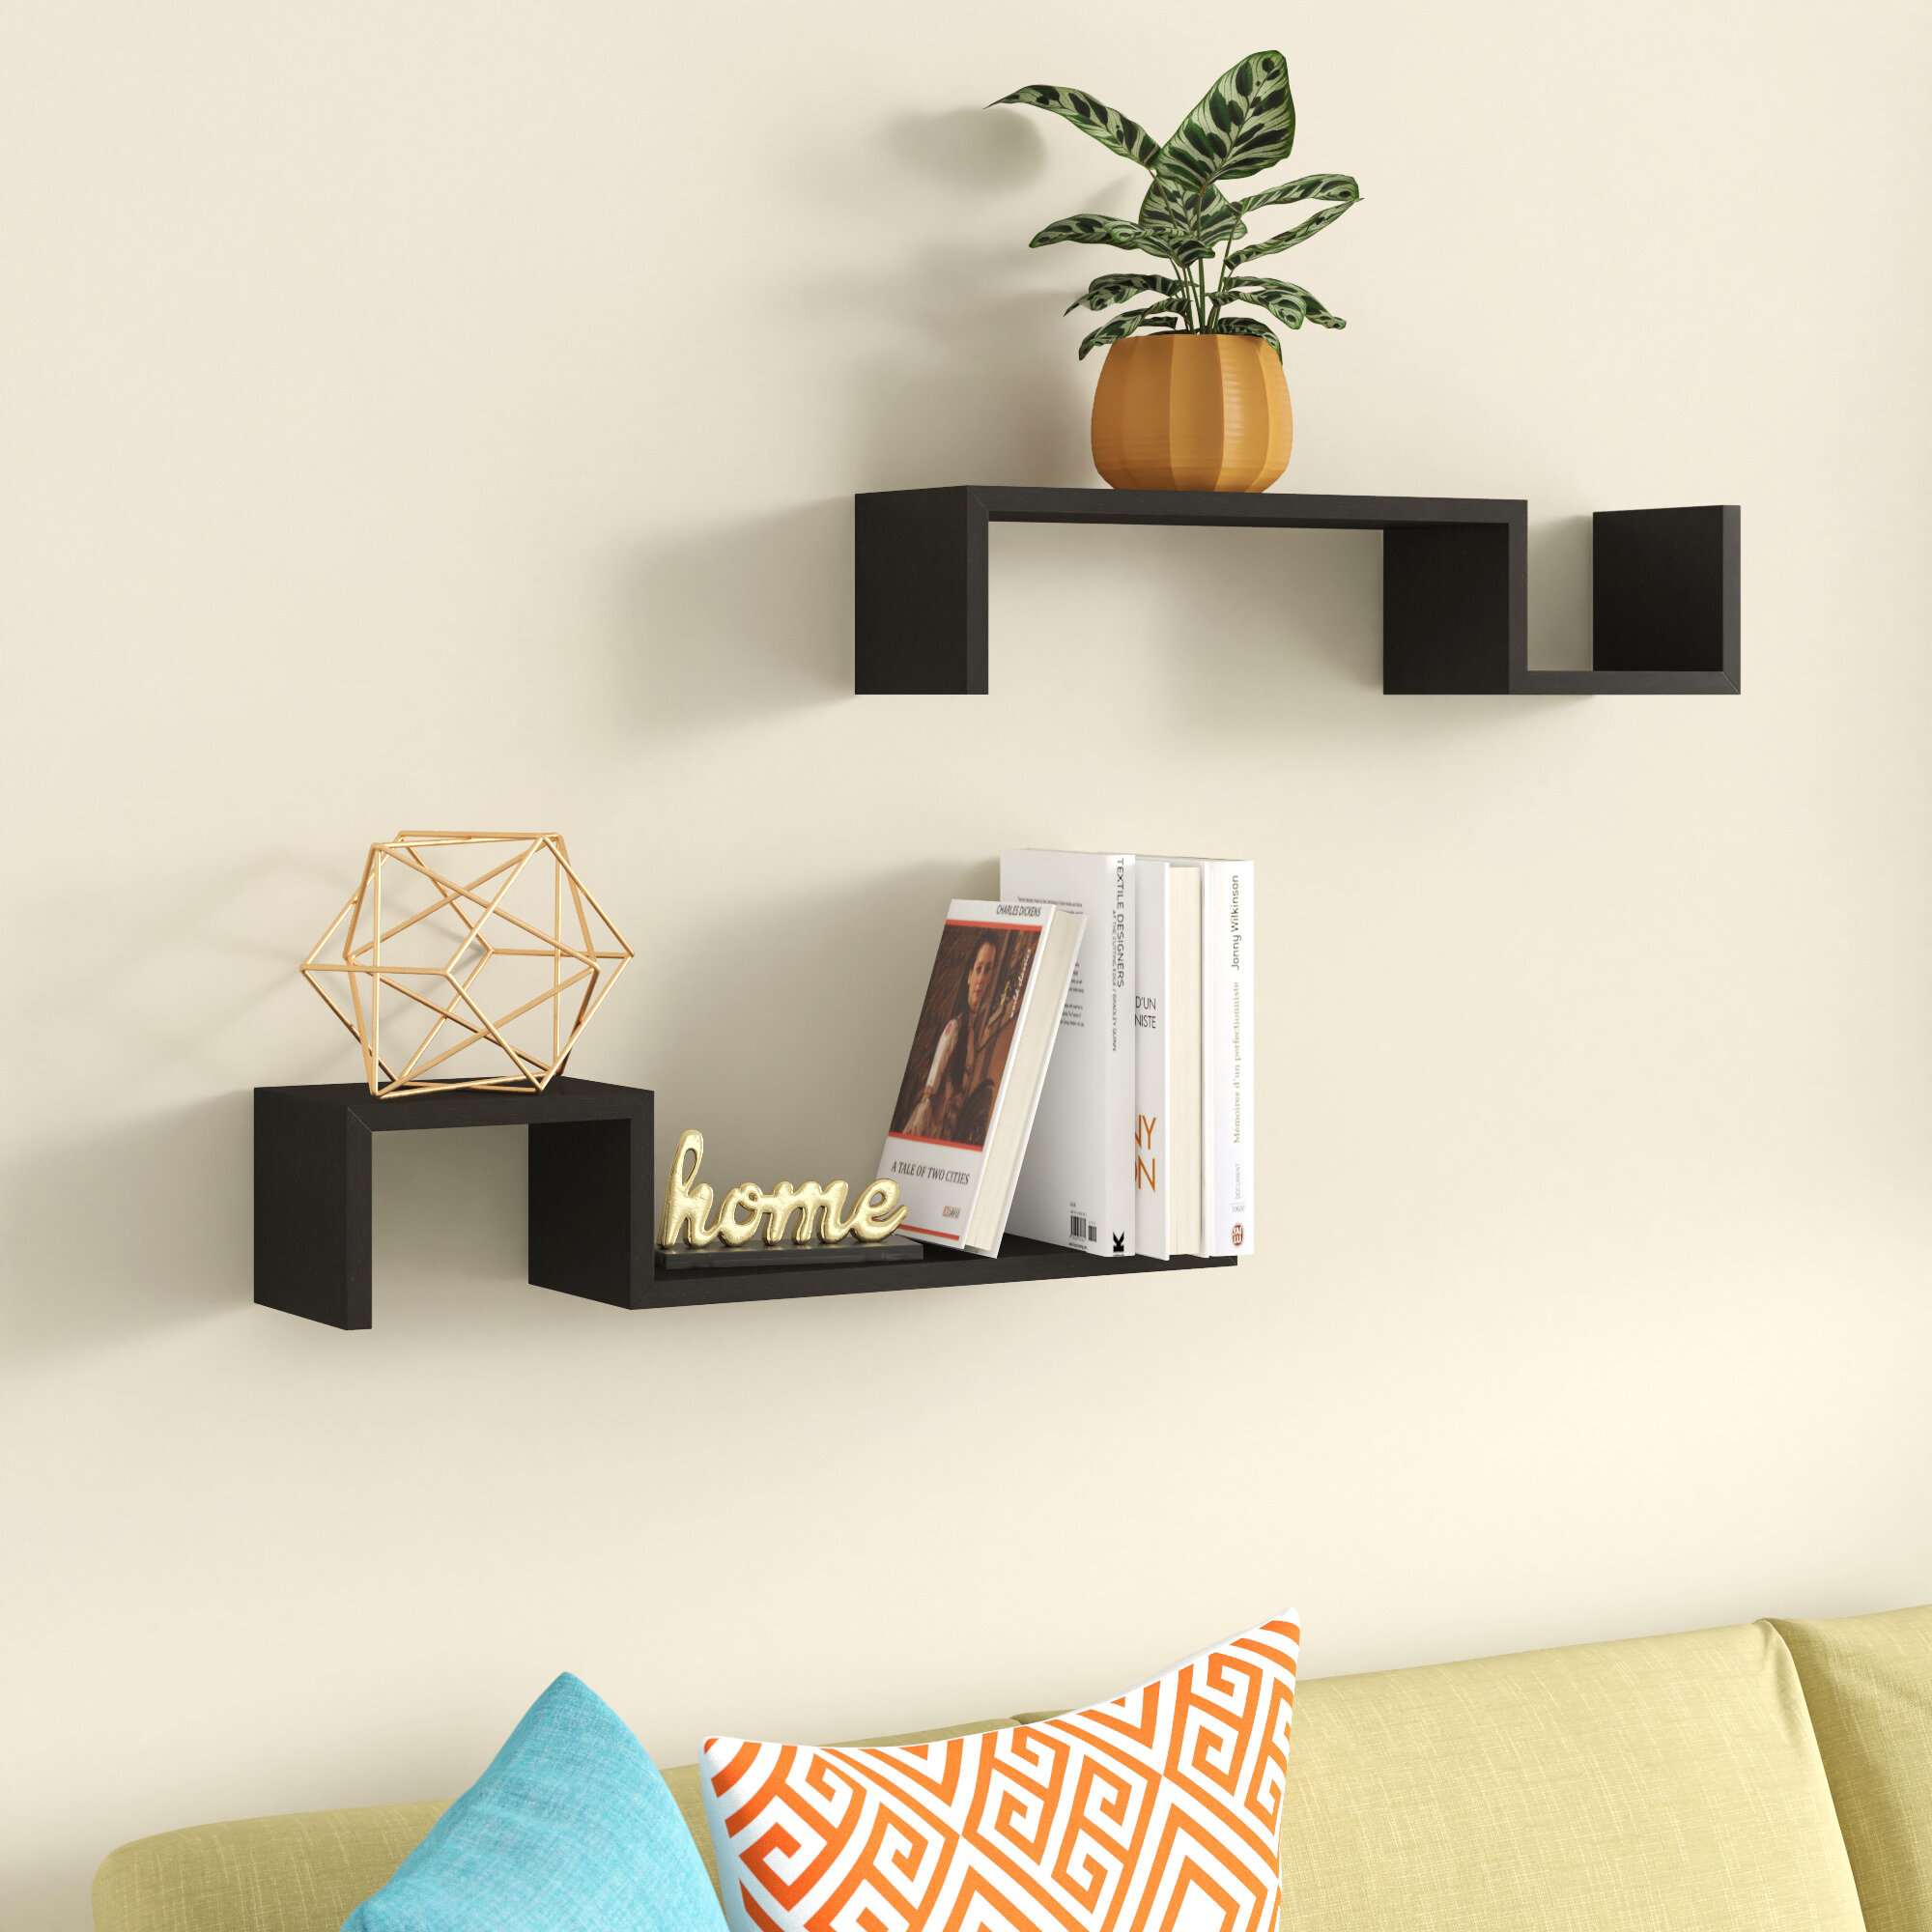 Acrylic Small Adhesive Wall Shelves,Mini Floating Shelves,Acrylic Display Shelves,Ledges for Pop Figures,Plant,Picture Photo Modern Wall for Bedroom